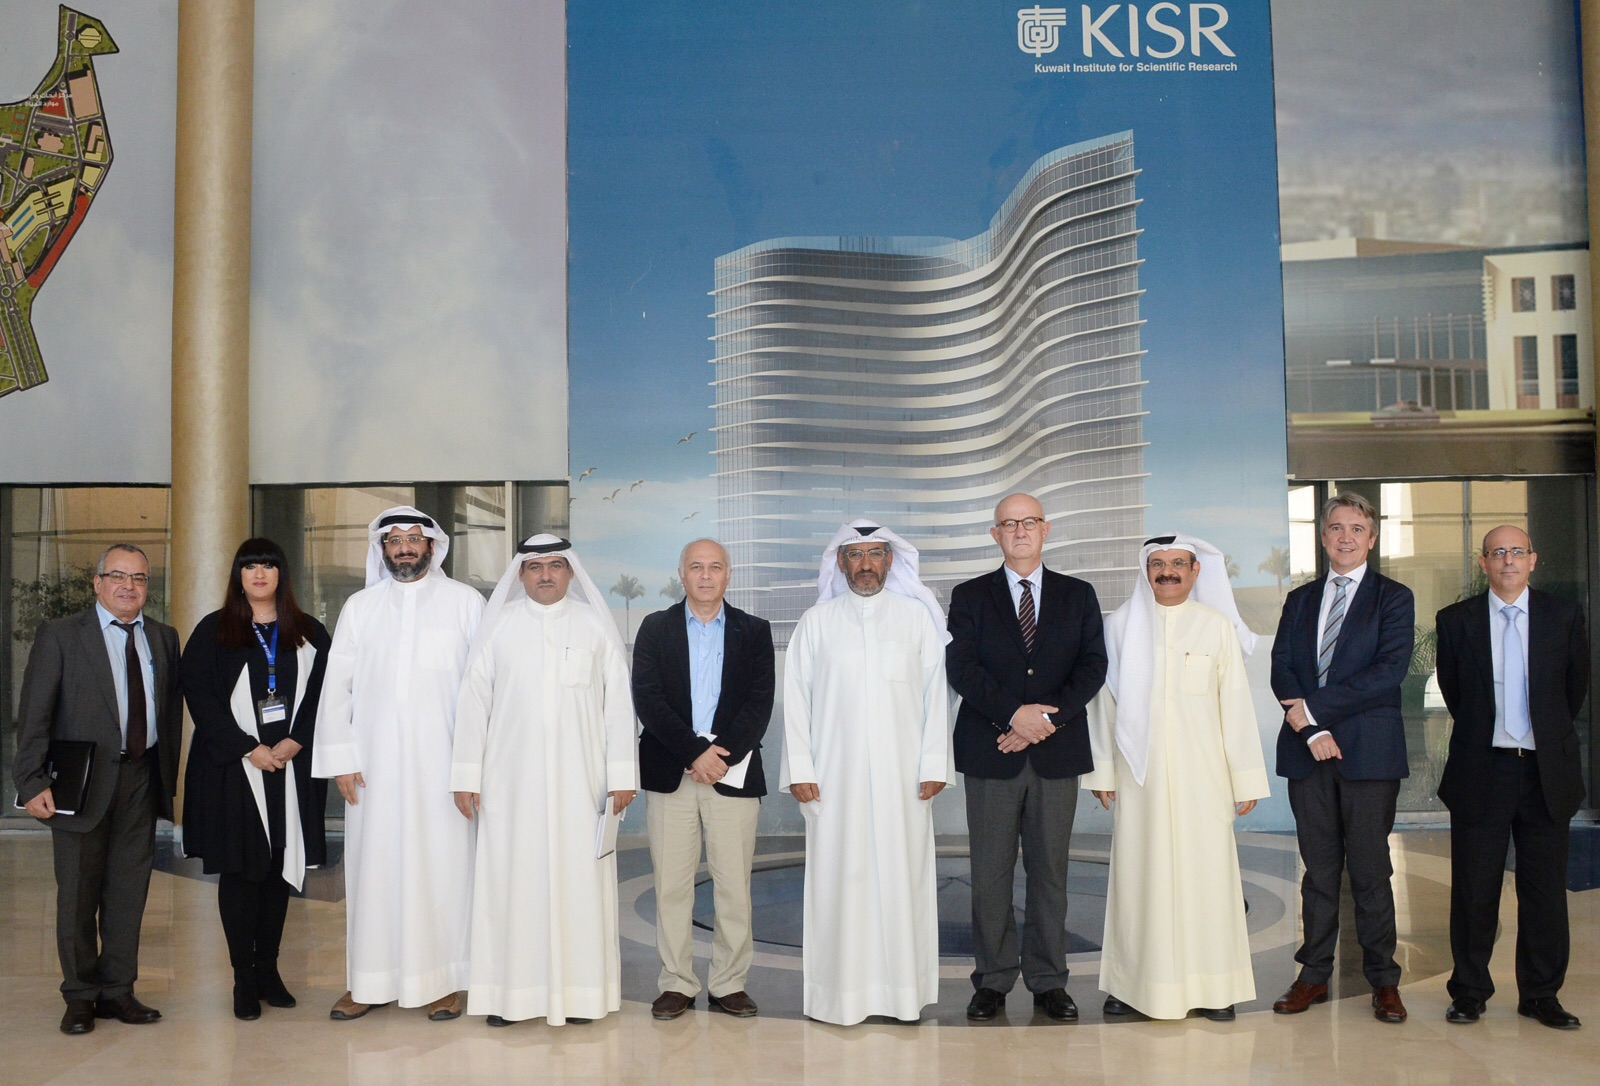 KISR chief Dr. Naji Al-Mutairi and officials with CSN's Chairman Fernando Marti and accompanying delegation